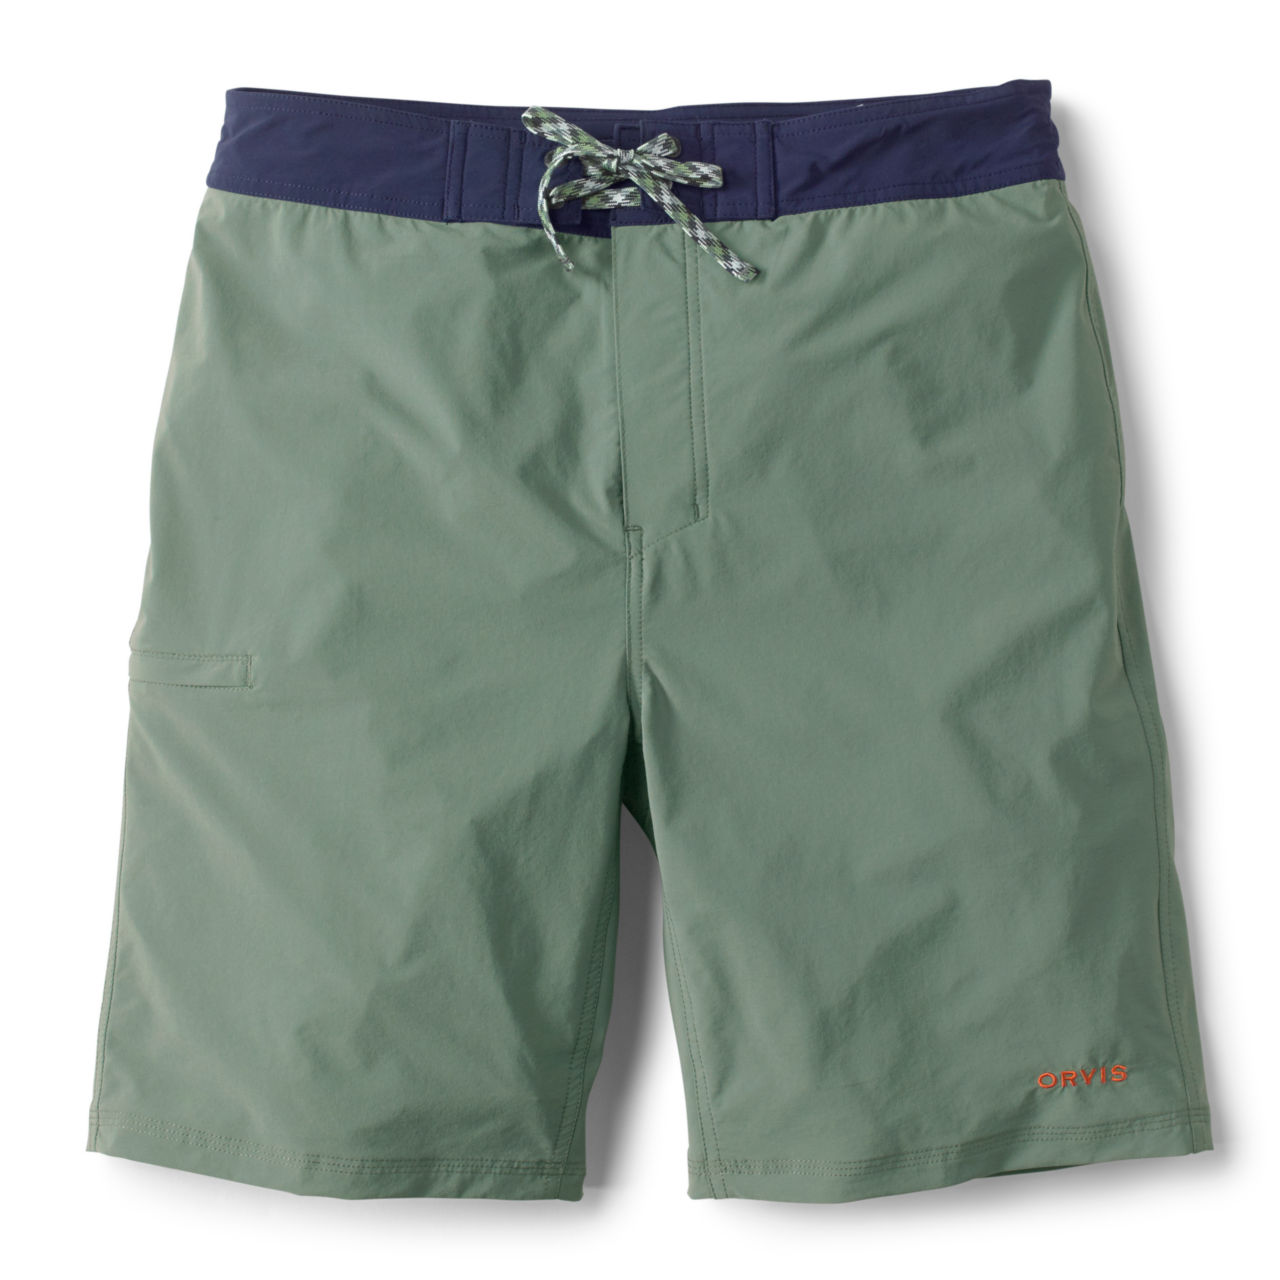 Jackson Quick-Dry Board Shorts - FOREST image number 0